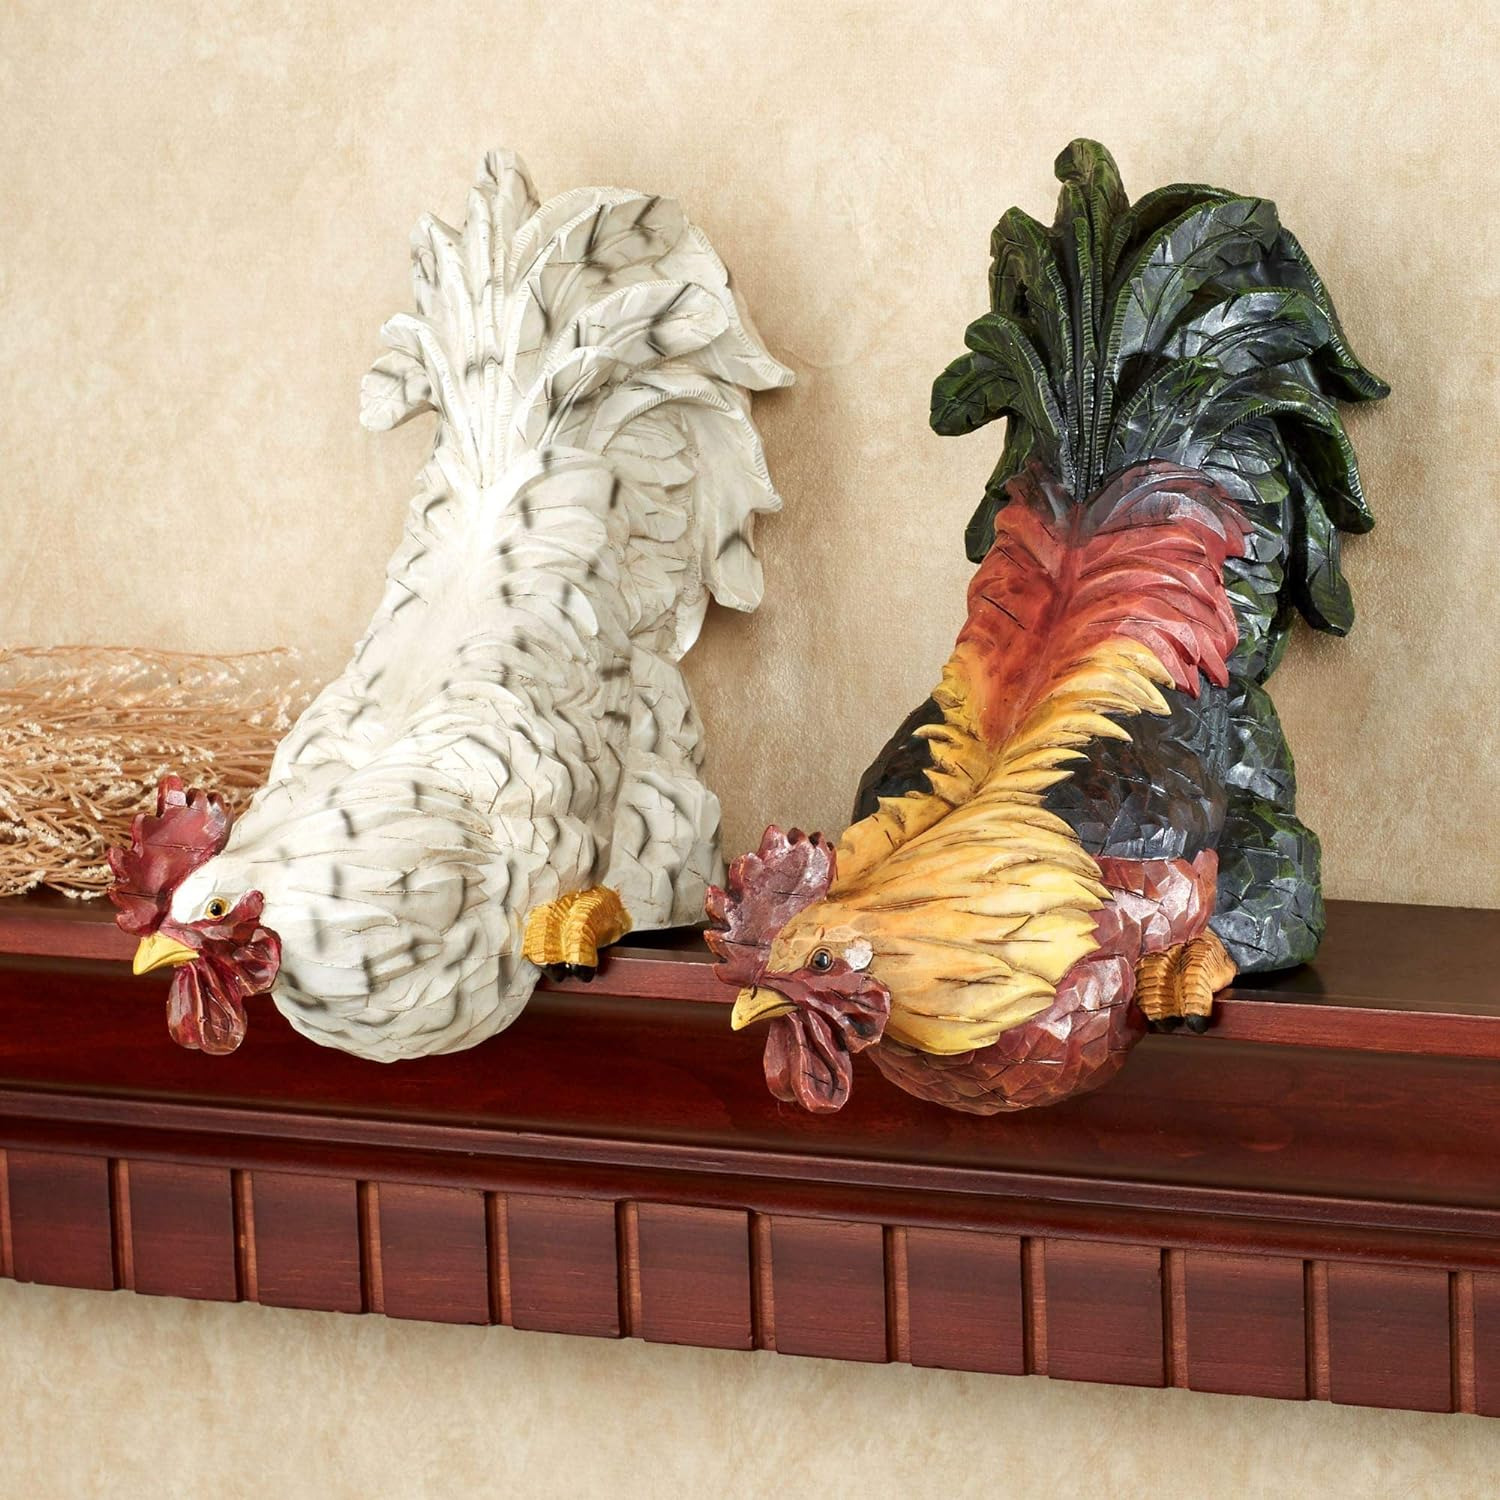 Content Rooster Shelf Sitter Set of Two - Resin - Green, Orange, Yellow, White, 